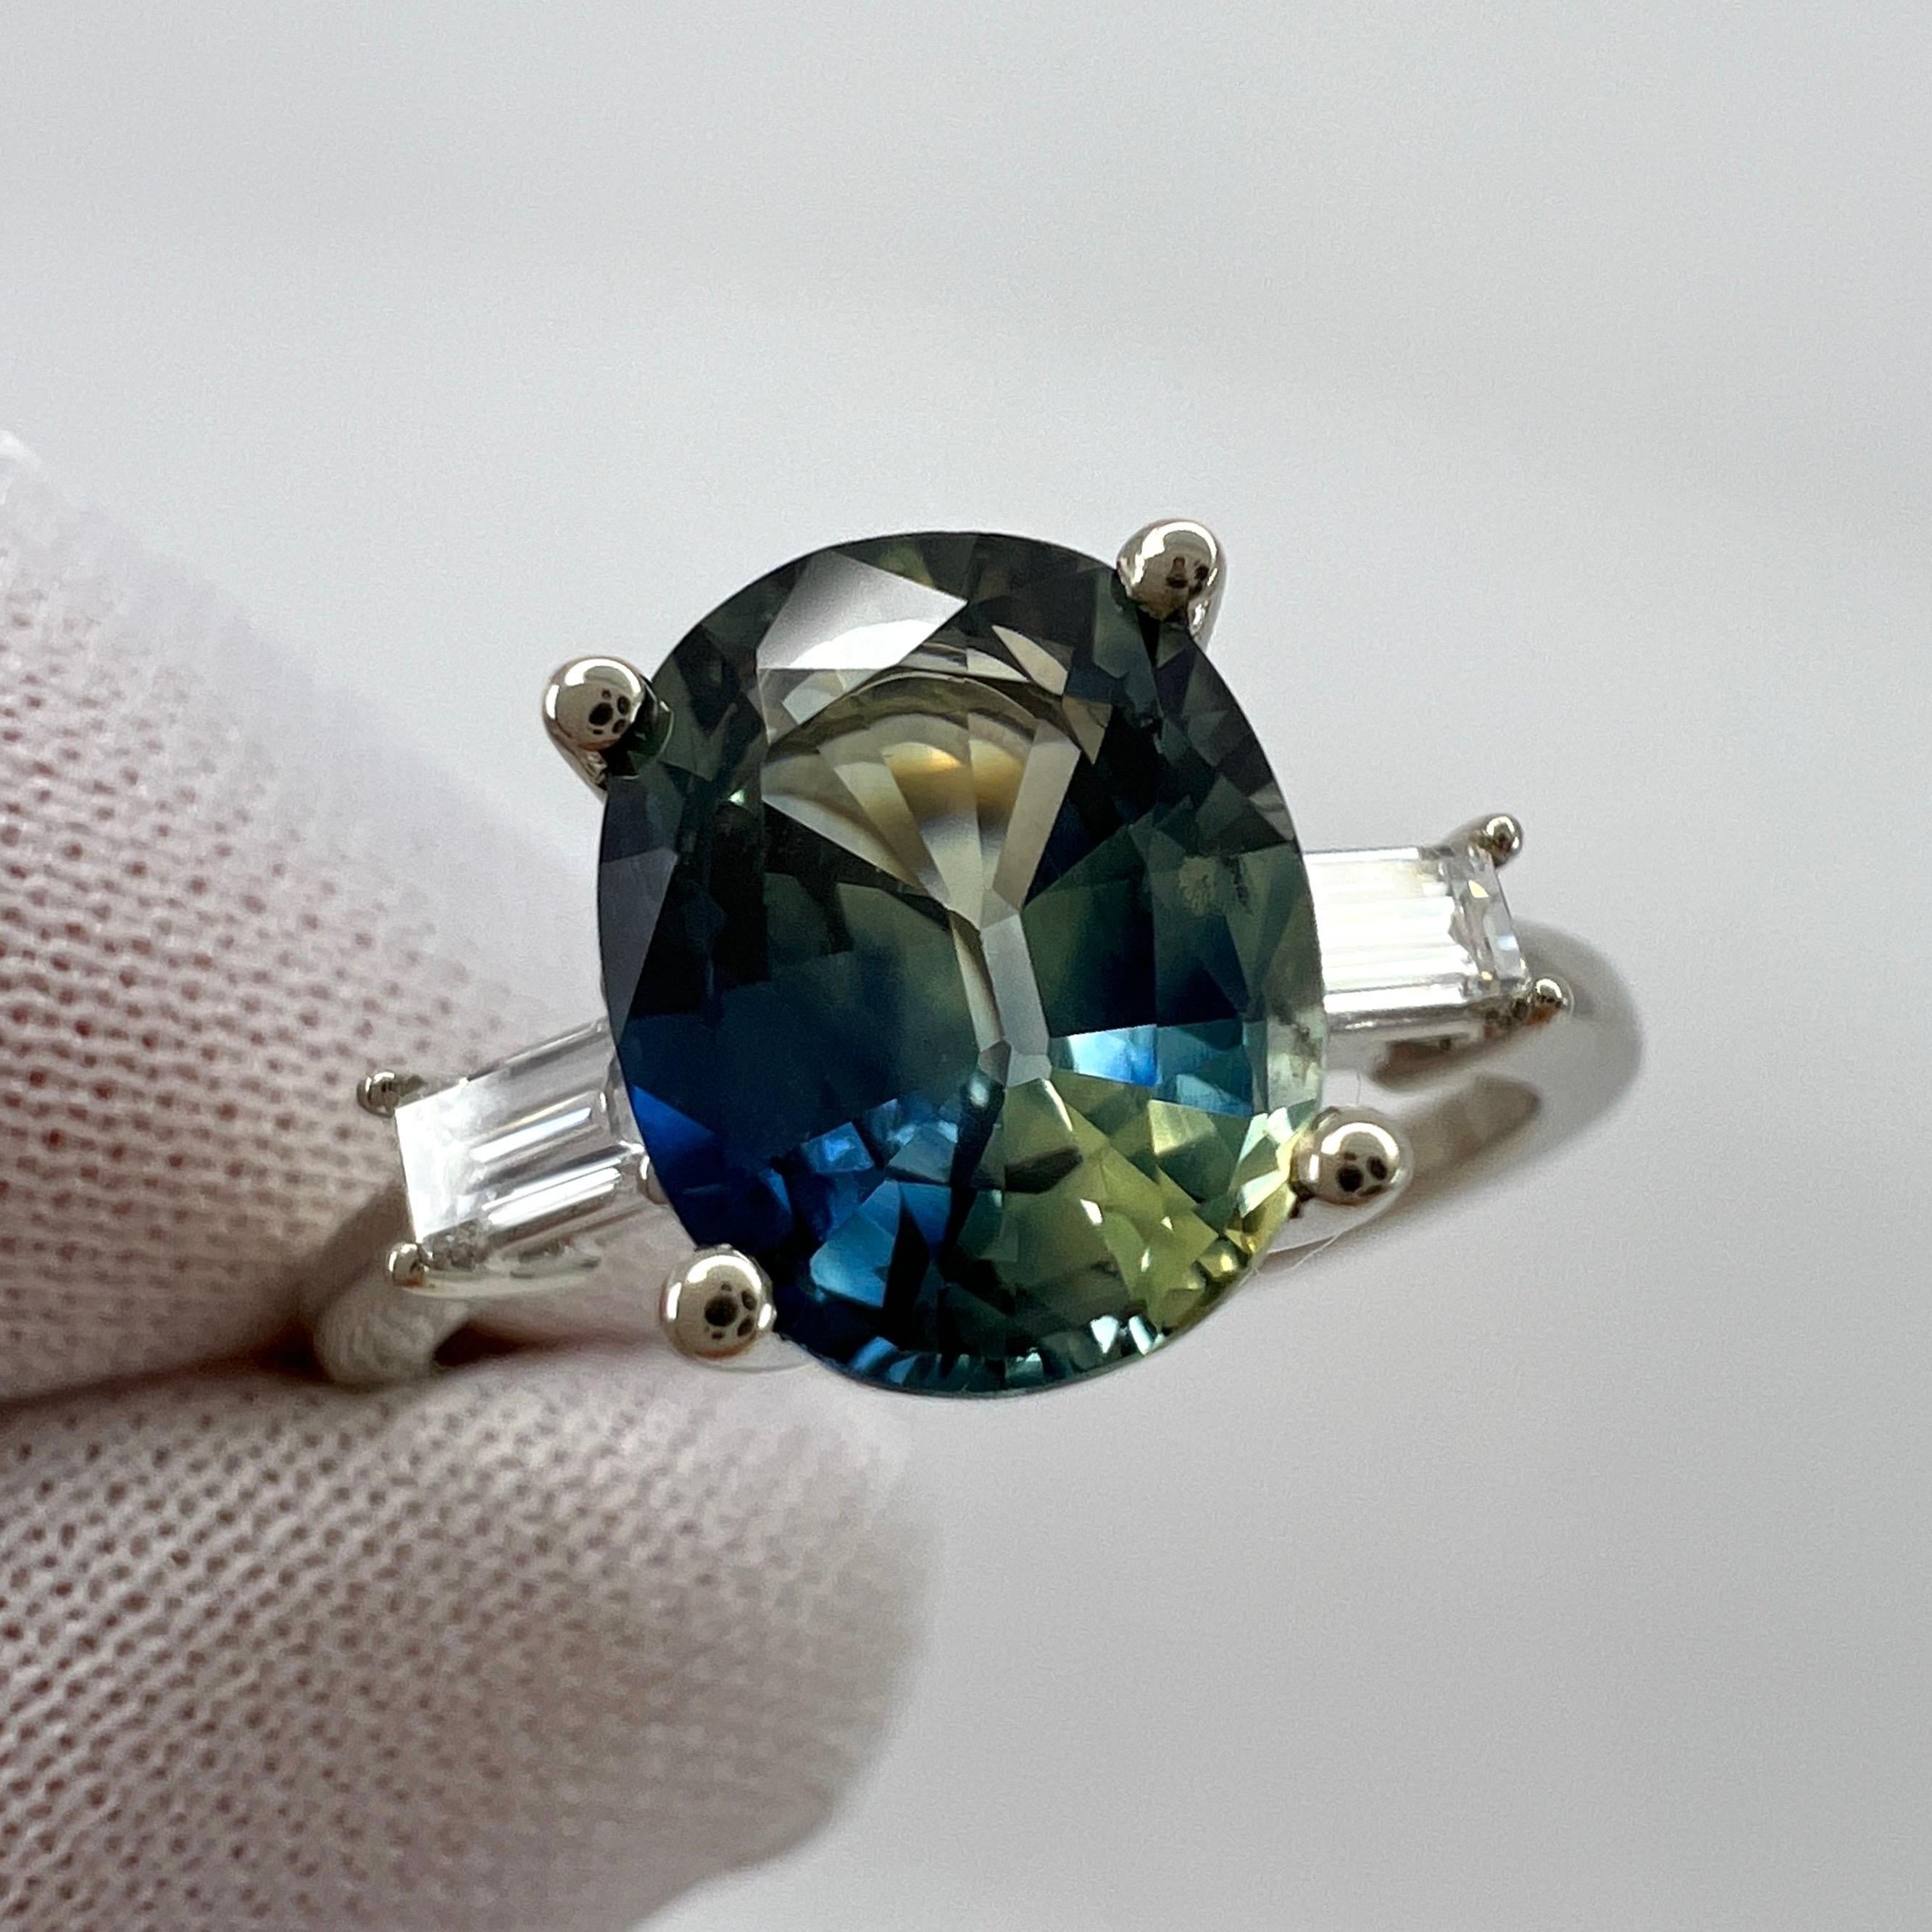 Natural Bi Colour Untreated Sapphire & Diamond 18k White Gold Three Stone Ring.

Rare GIA Certified 2.43 carat natural sapphire with a unique blue & yellow bi colour effect. Very rare and stunning to see, similarly seen in ametrine and watermelon